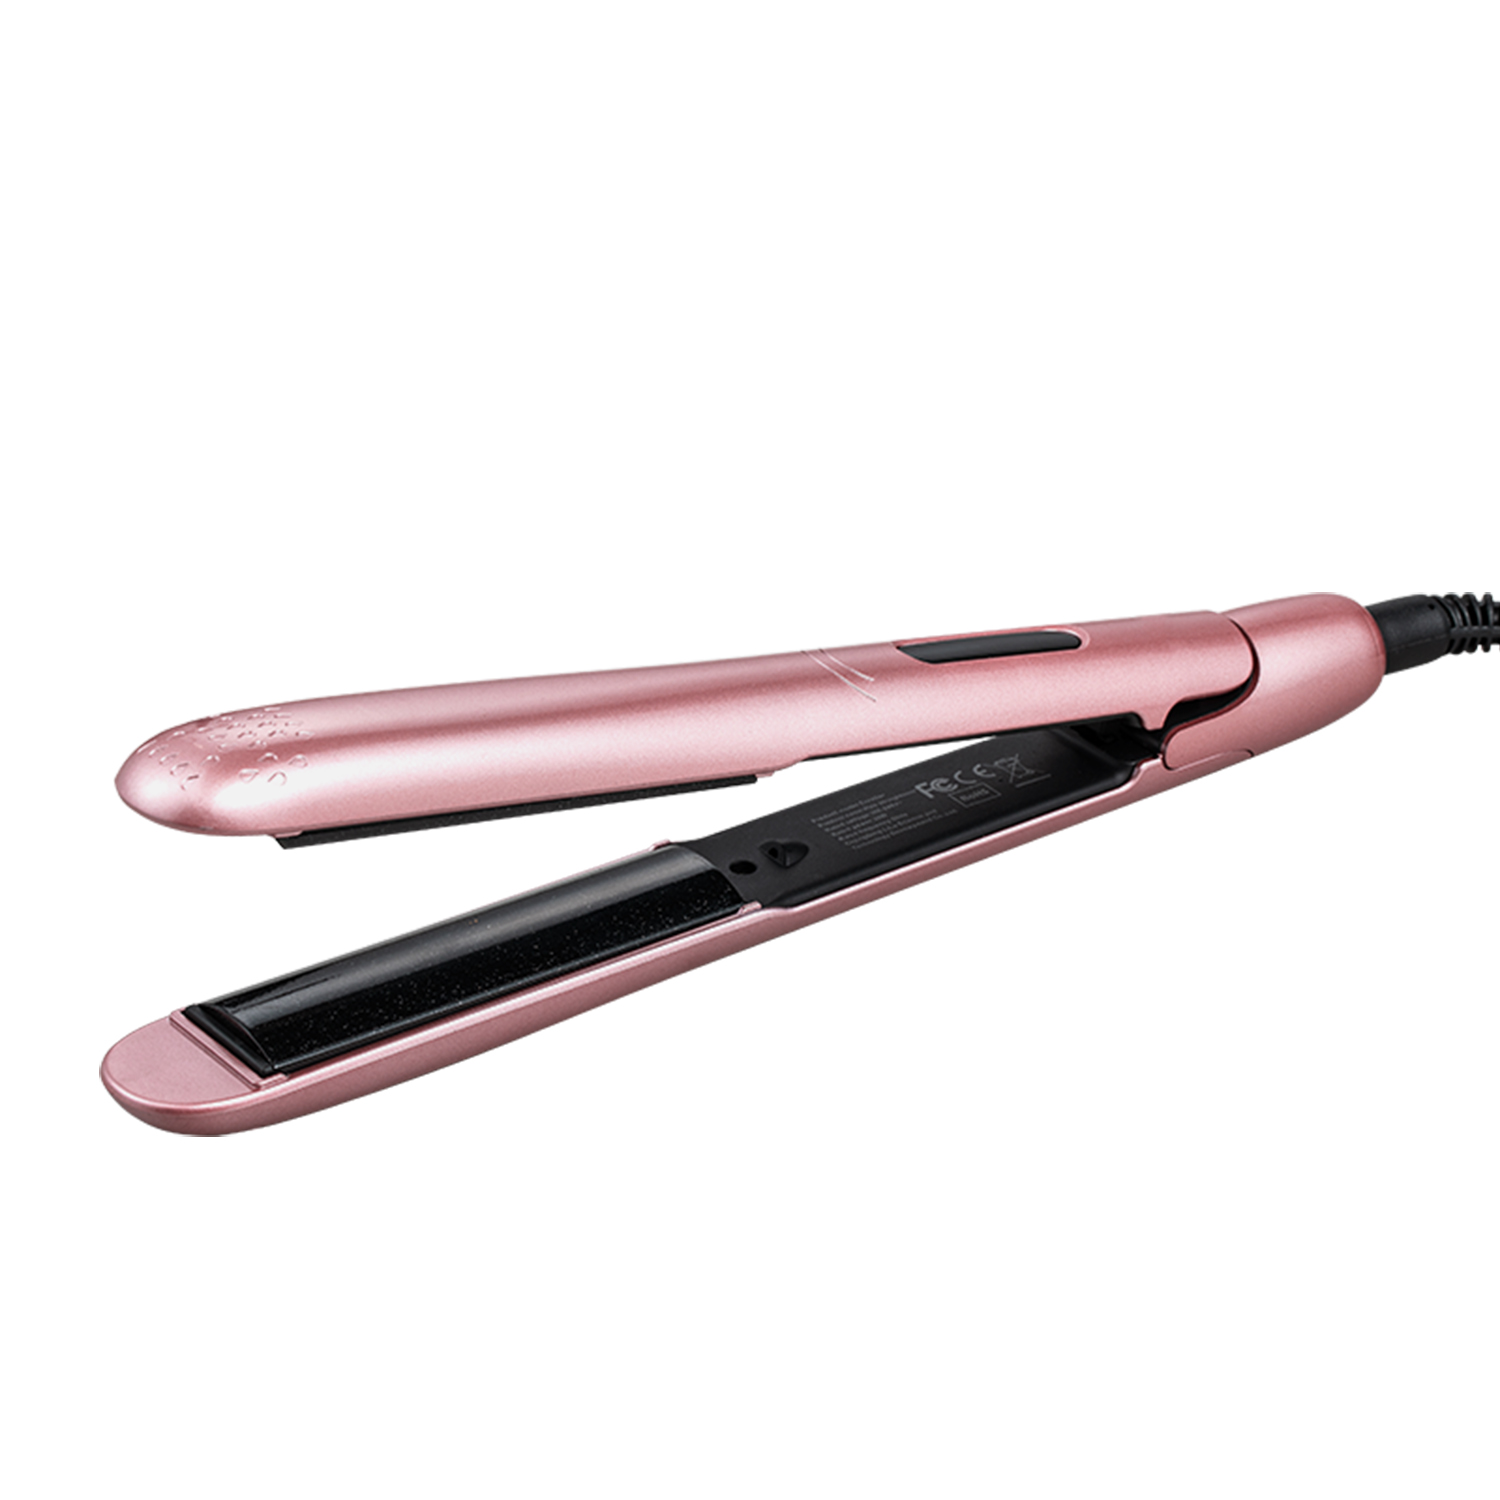 How long should the hair straightening splint be heated？To European